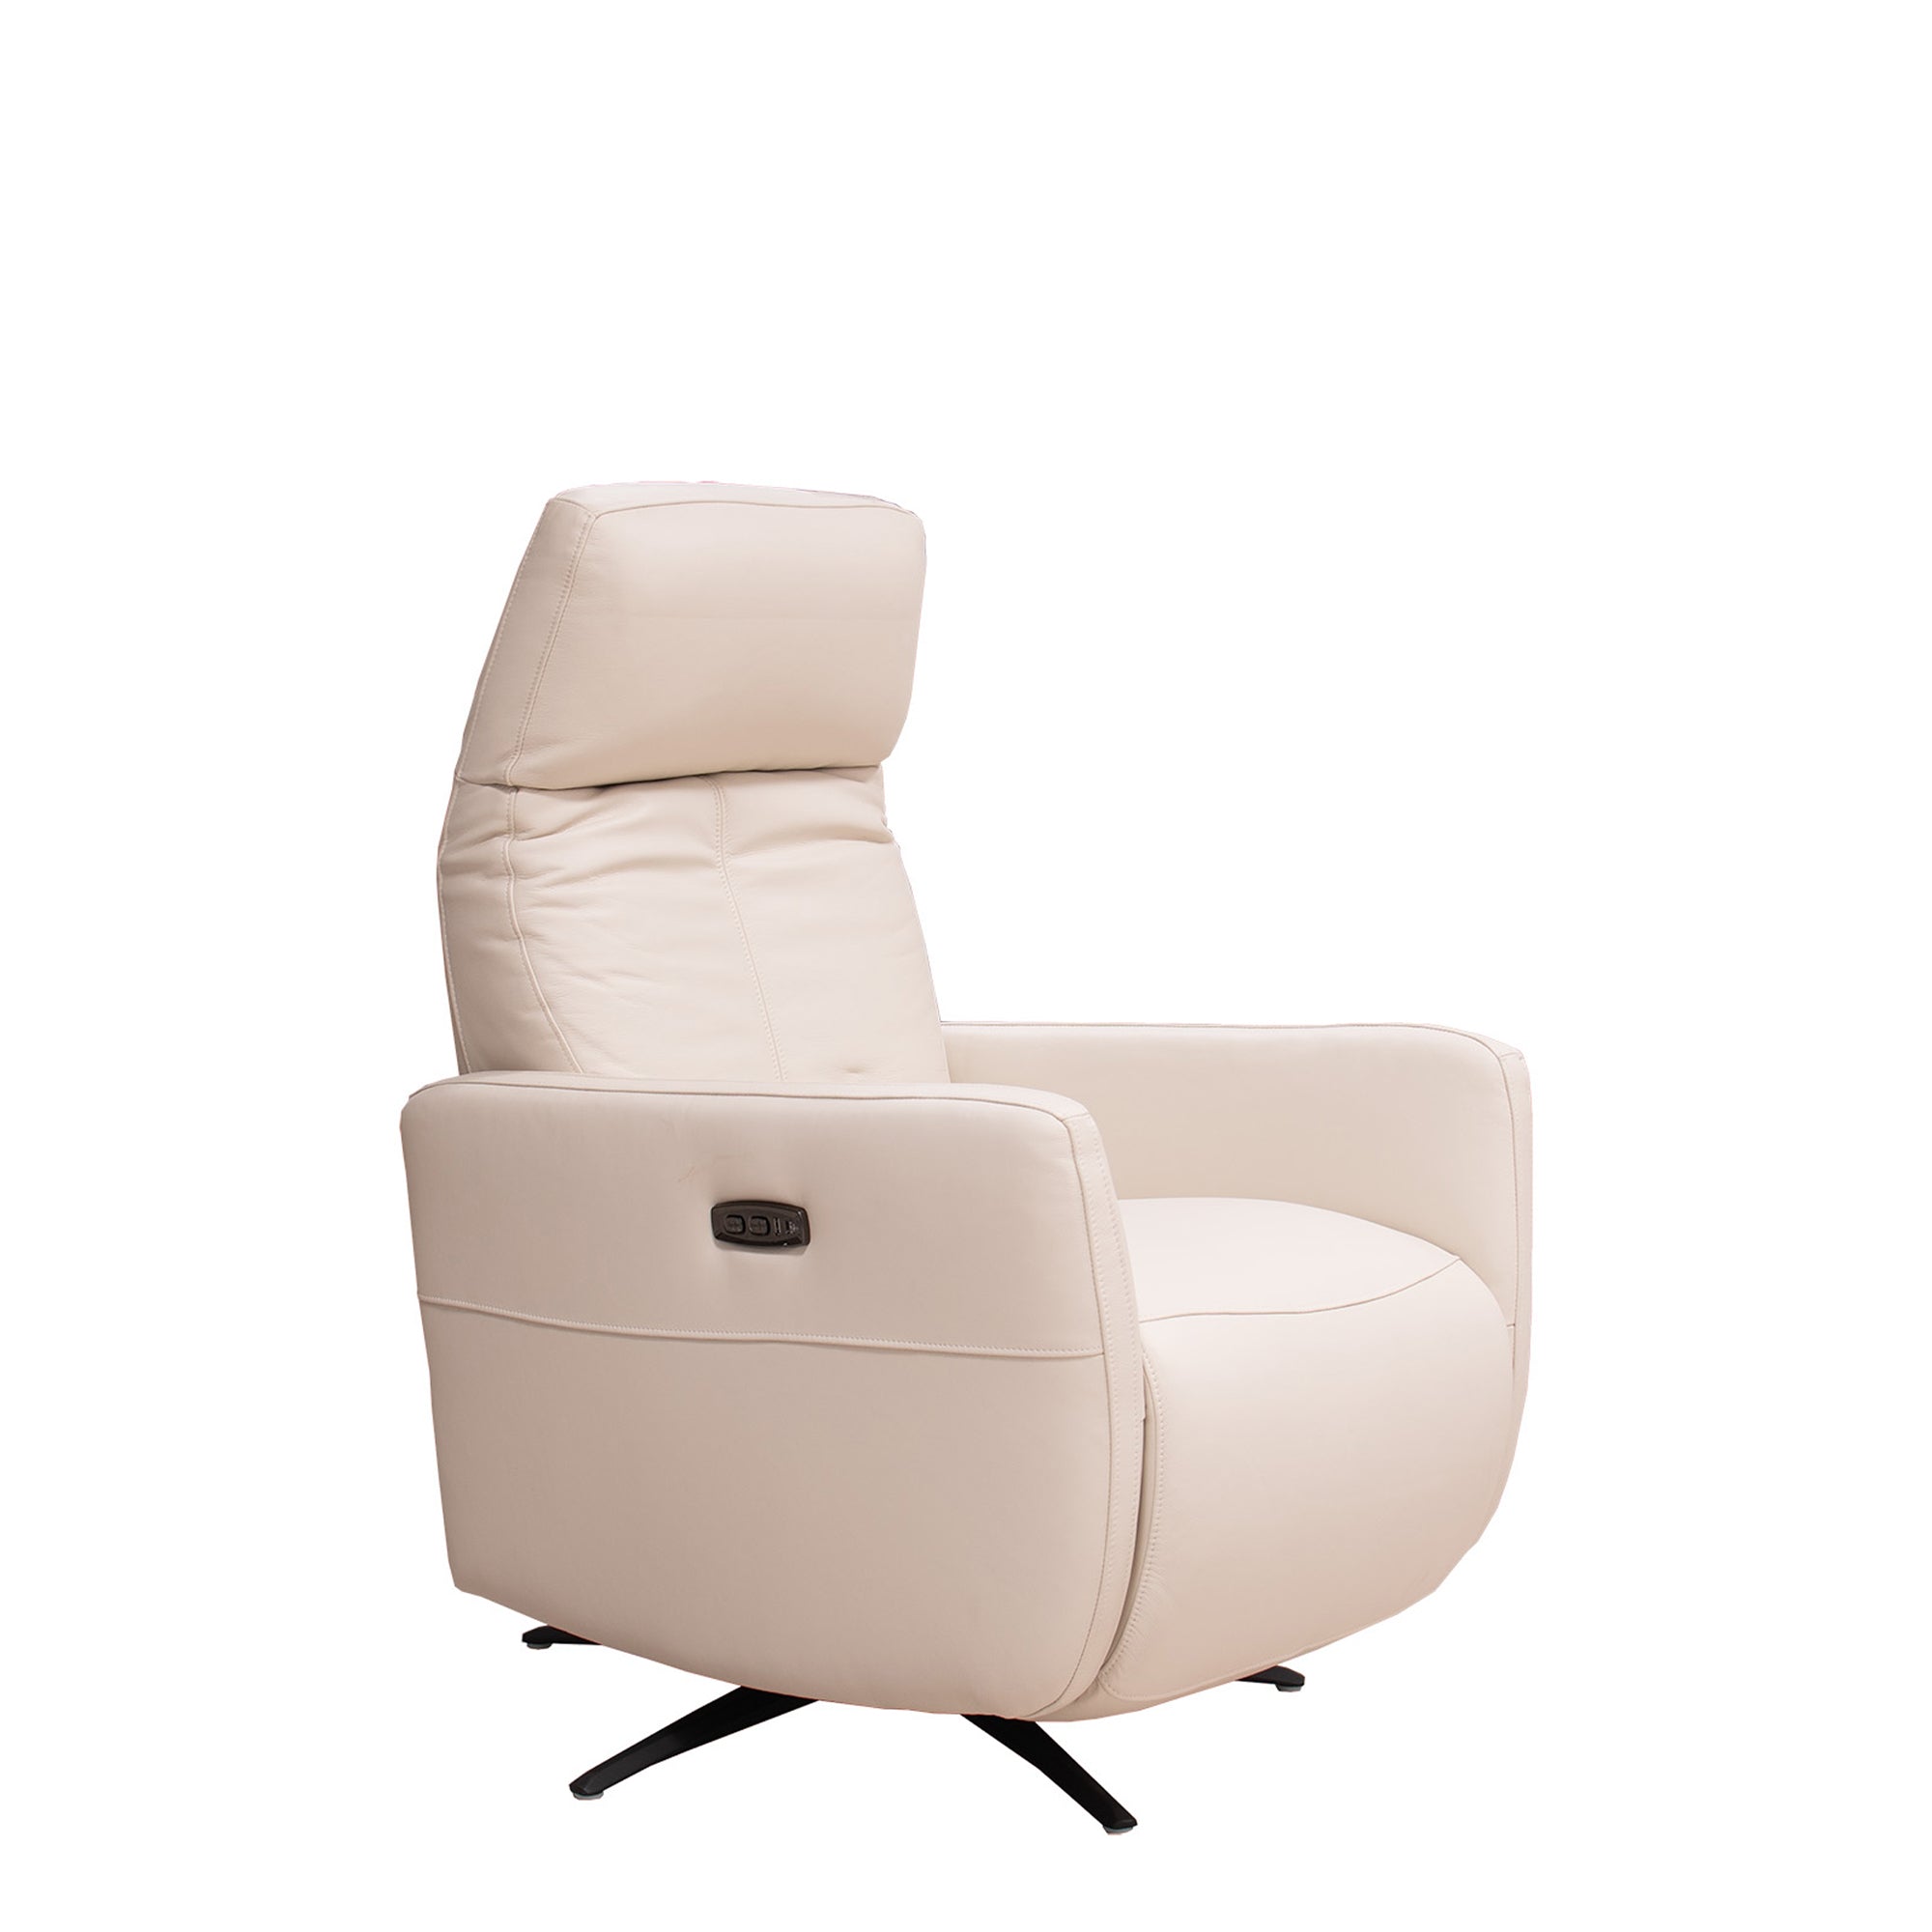 Swivel Reliner Chair With USB Toggle Switch In Leather Cat 20